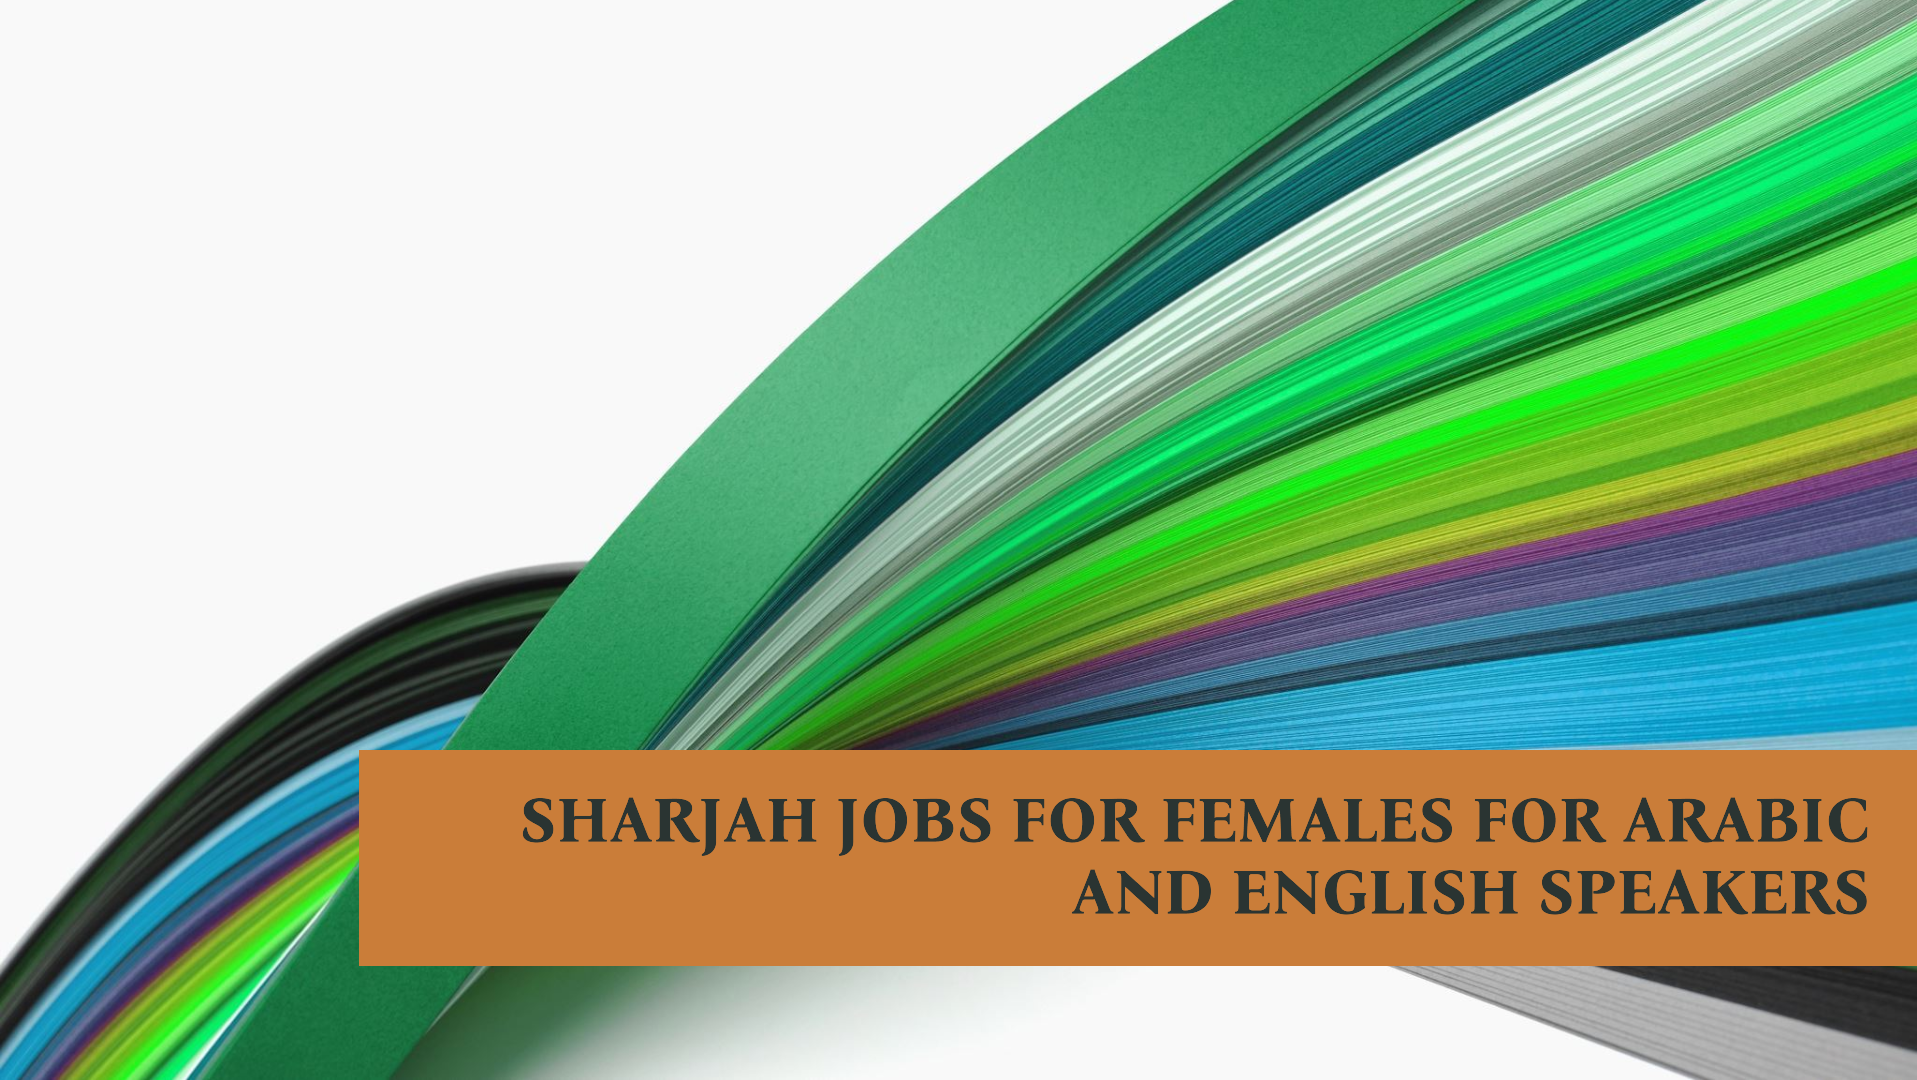 Sharjah jobs for females for Arabic and English speakers